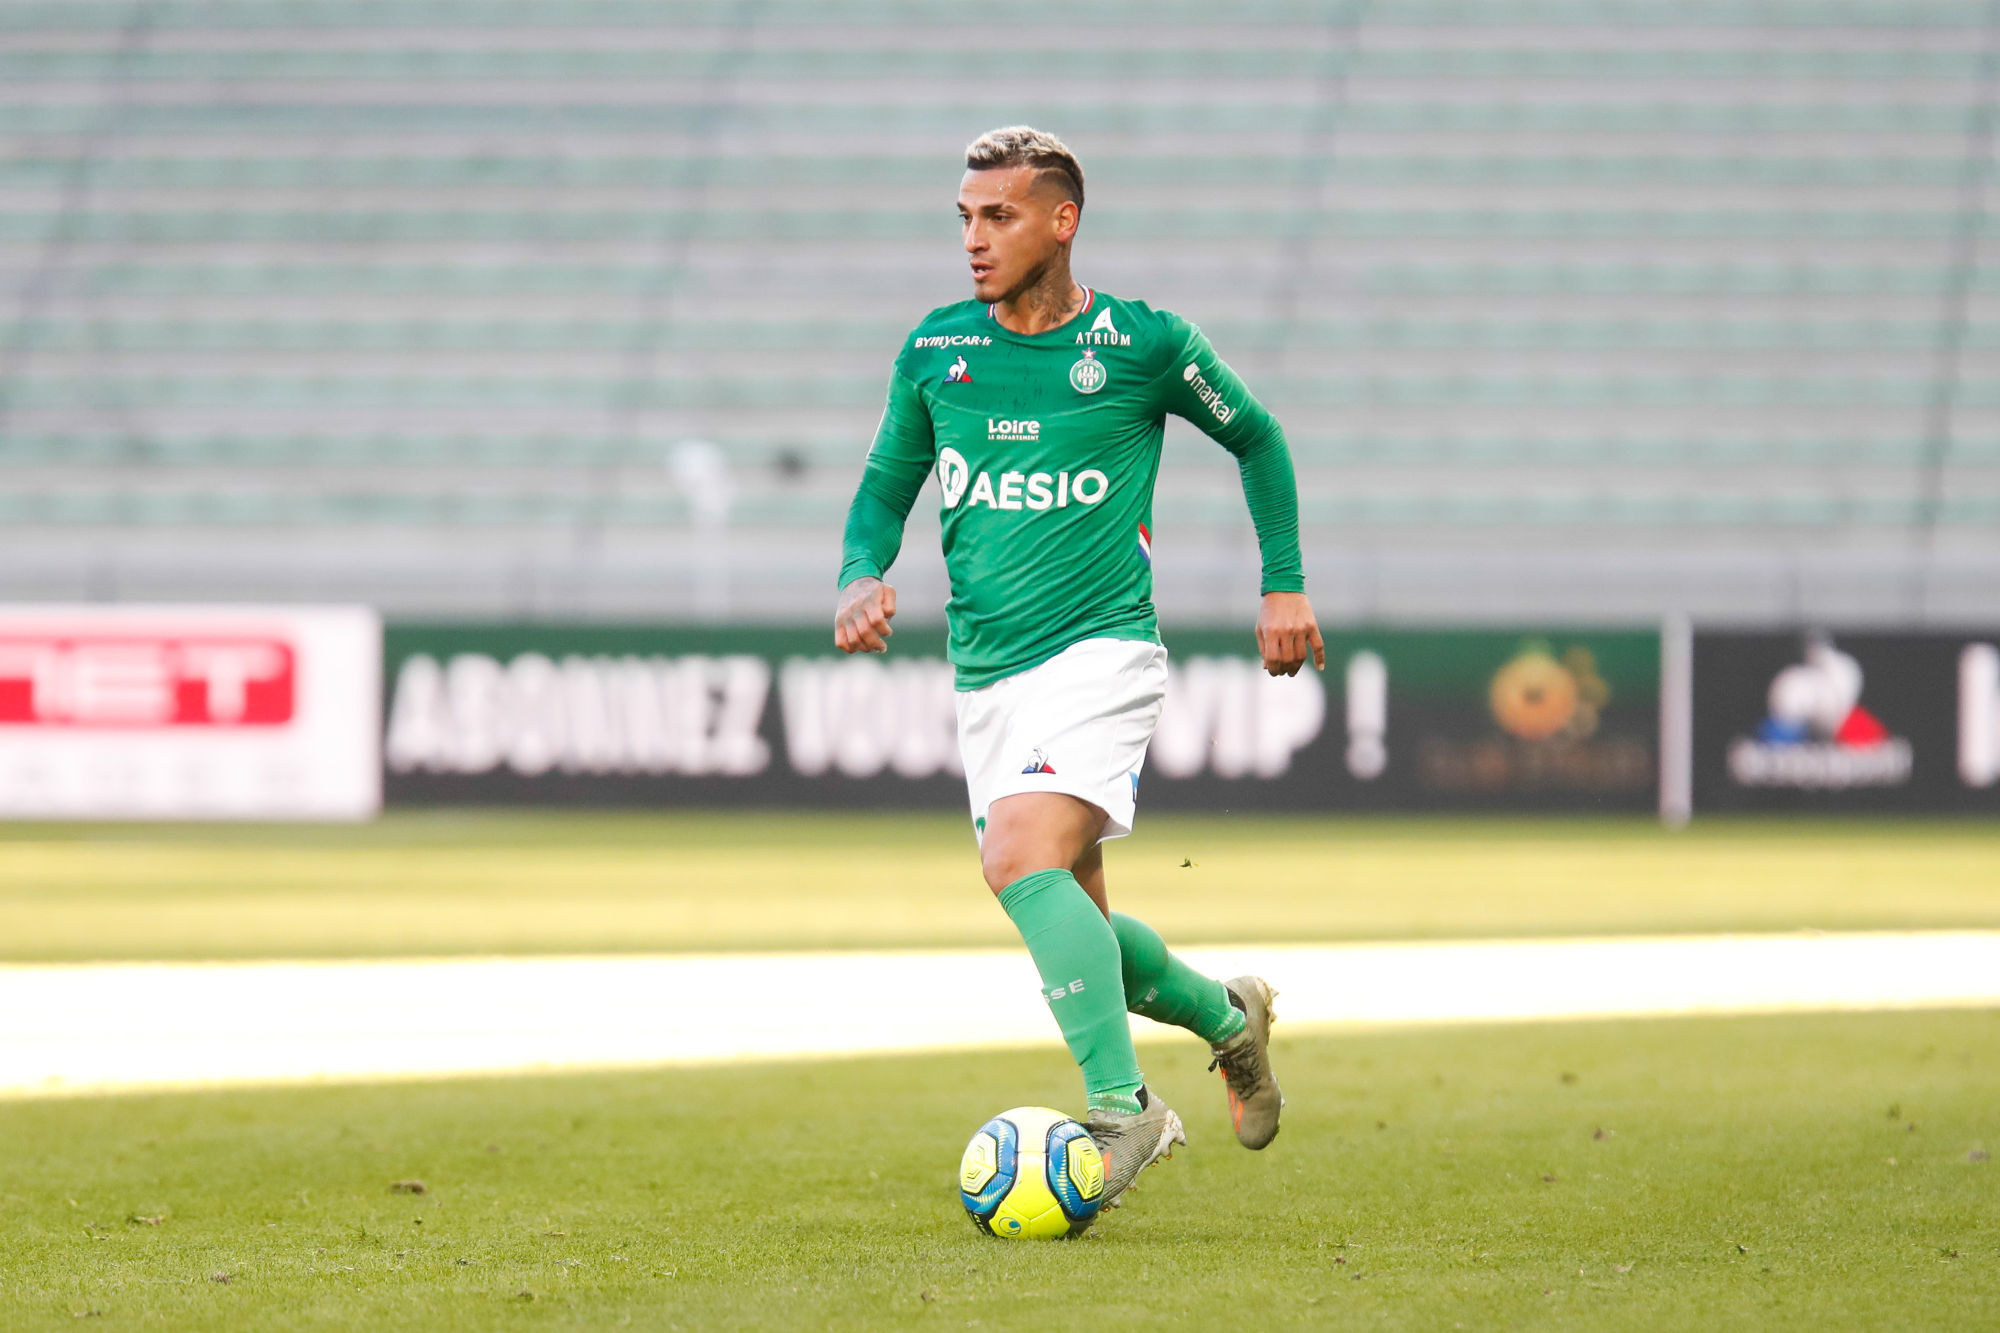 Miguel TRAUCO SAAVEDRA of Saint Etienne during the Ligue 1 match between AS Saint-Etienne and FC Nantes at Stade Geoffroy-Guichard on January 12, 2020 in Saint-Etienne, France. (Photo by Romain Biard/Icon Sport) - Miguel TRAUCO SAAVEDRA - Stade Geoffroy-Guichard - Saint Etienne (France)